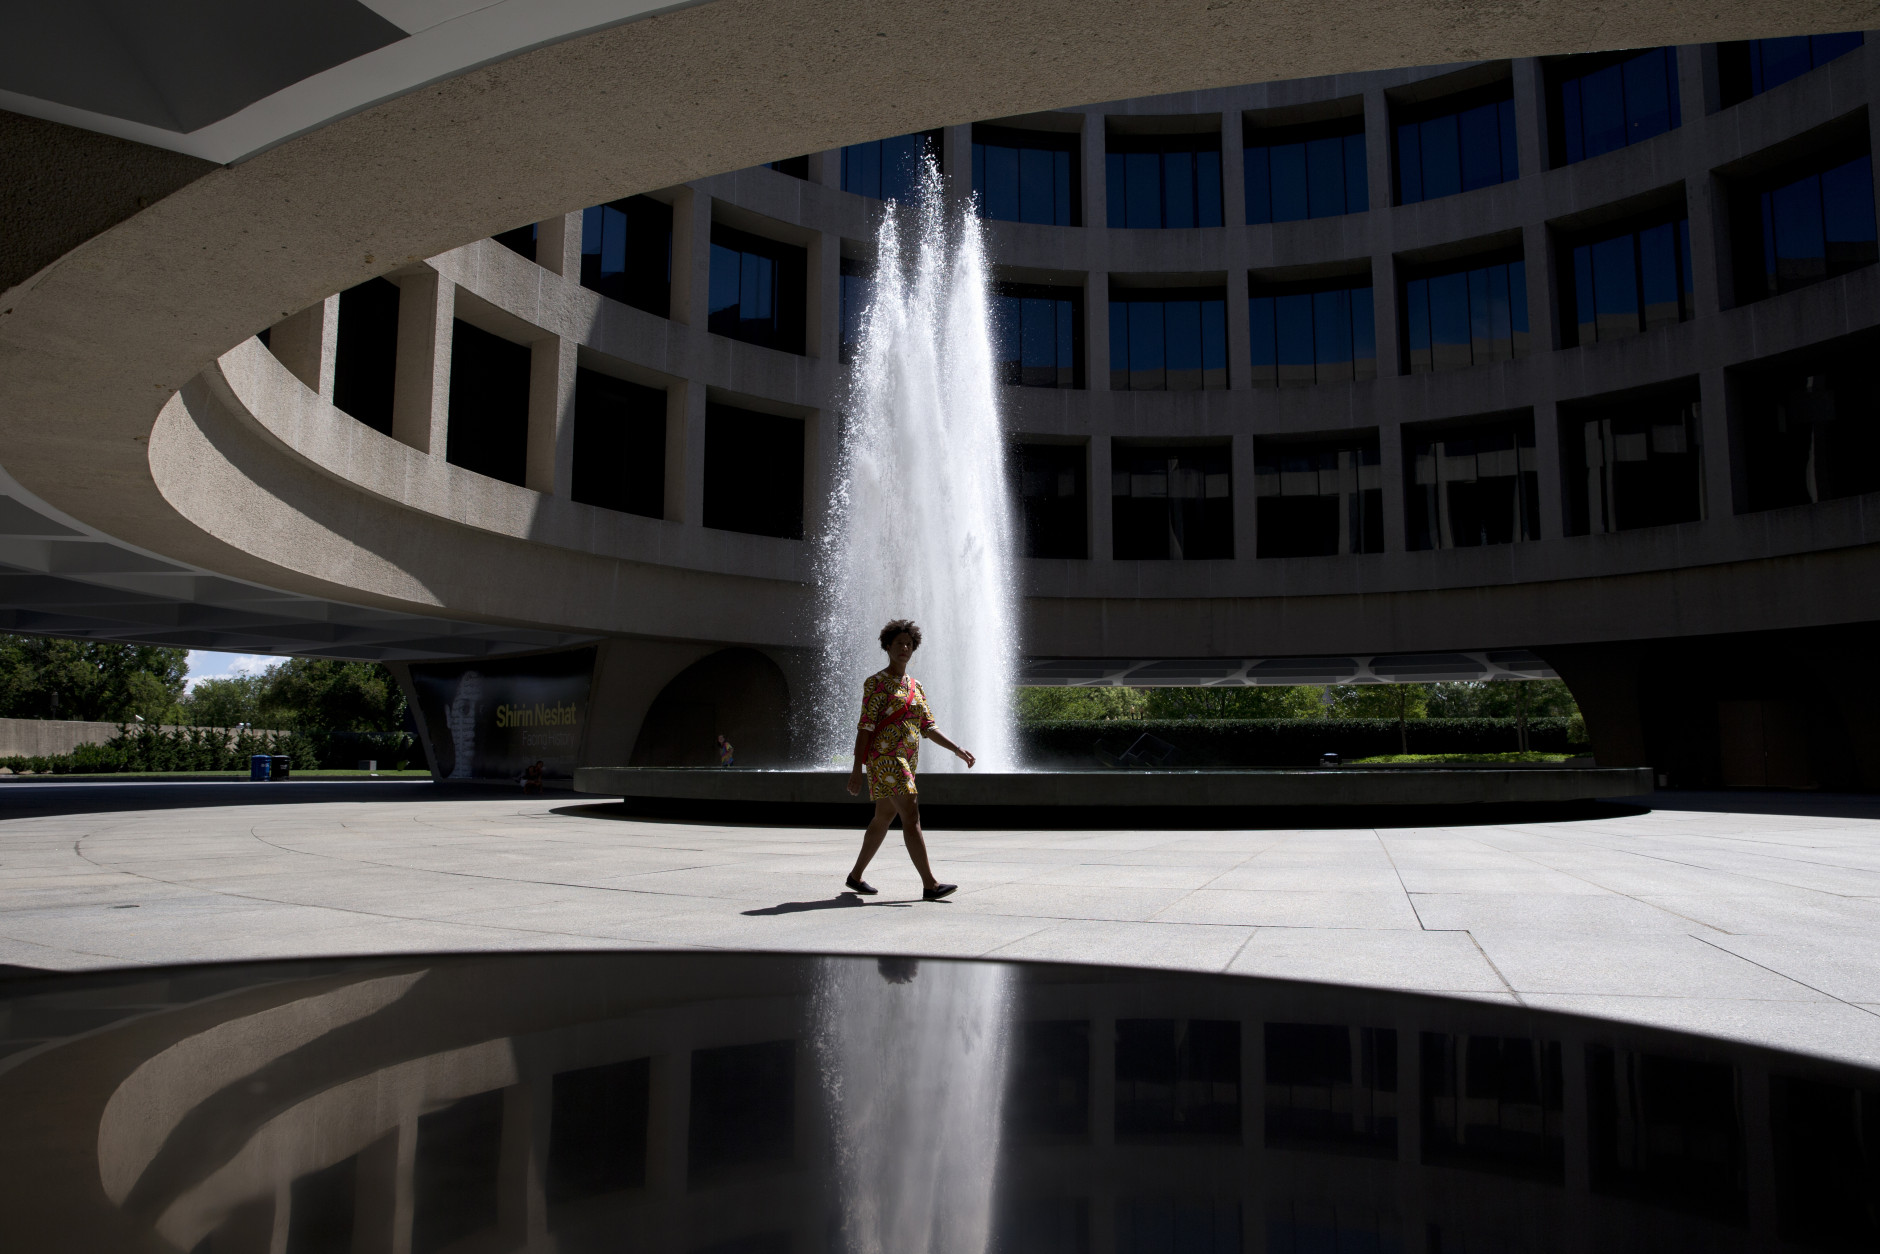 A woman walks past the fountain in the courtyard of the Hirshhorn Museum and Sculpture Garden in Washington, Thursday, Aug. 13, 2015. (AP Photo/Carolyn Kaster)